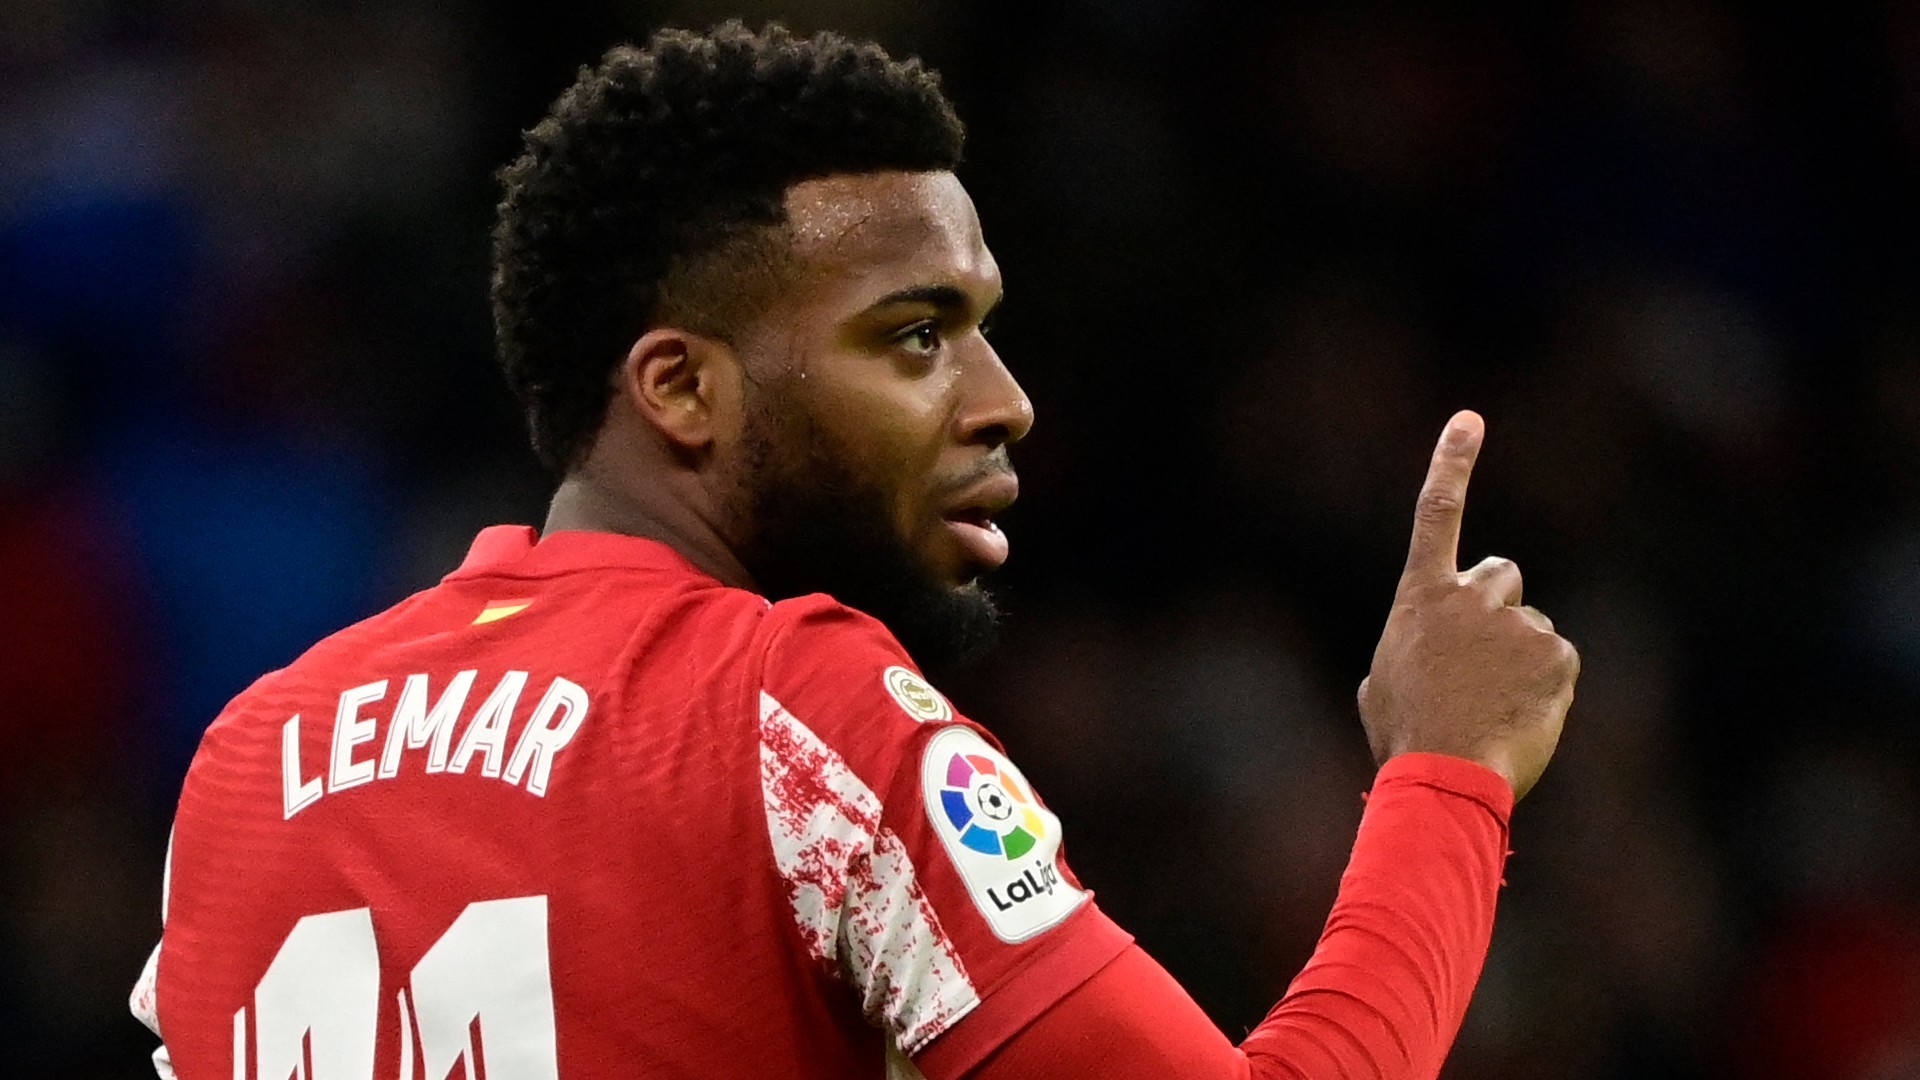 Lemar on the market: Atletico Madrid willing to sell French forward after he refuses pay cut